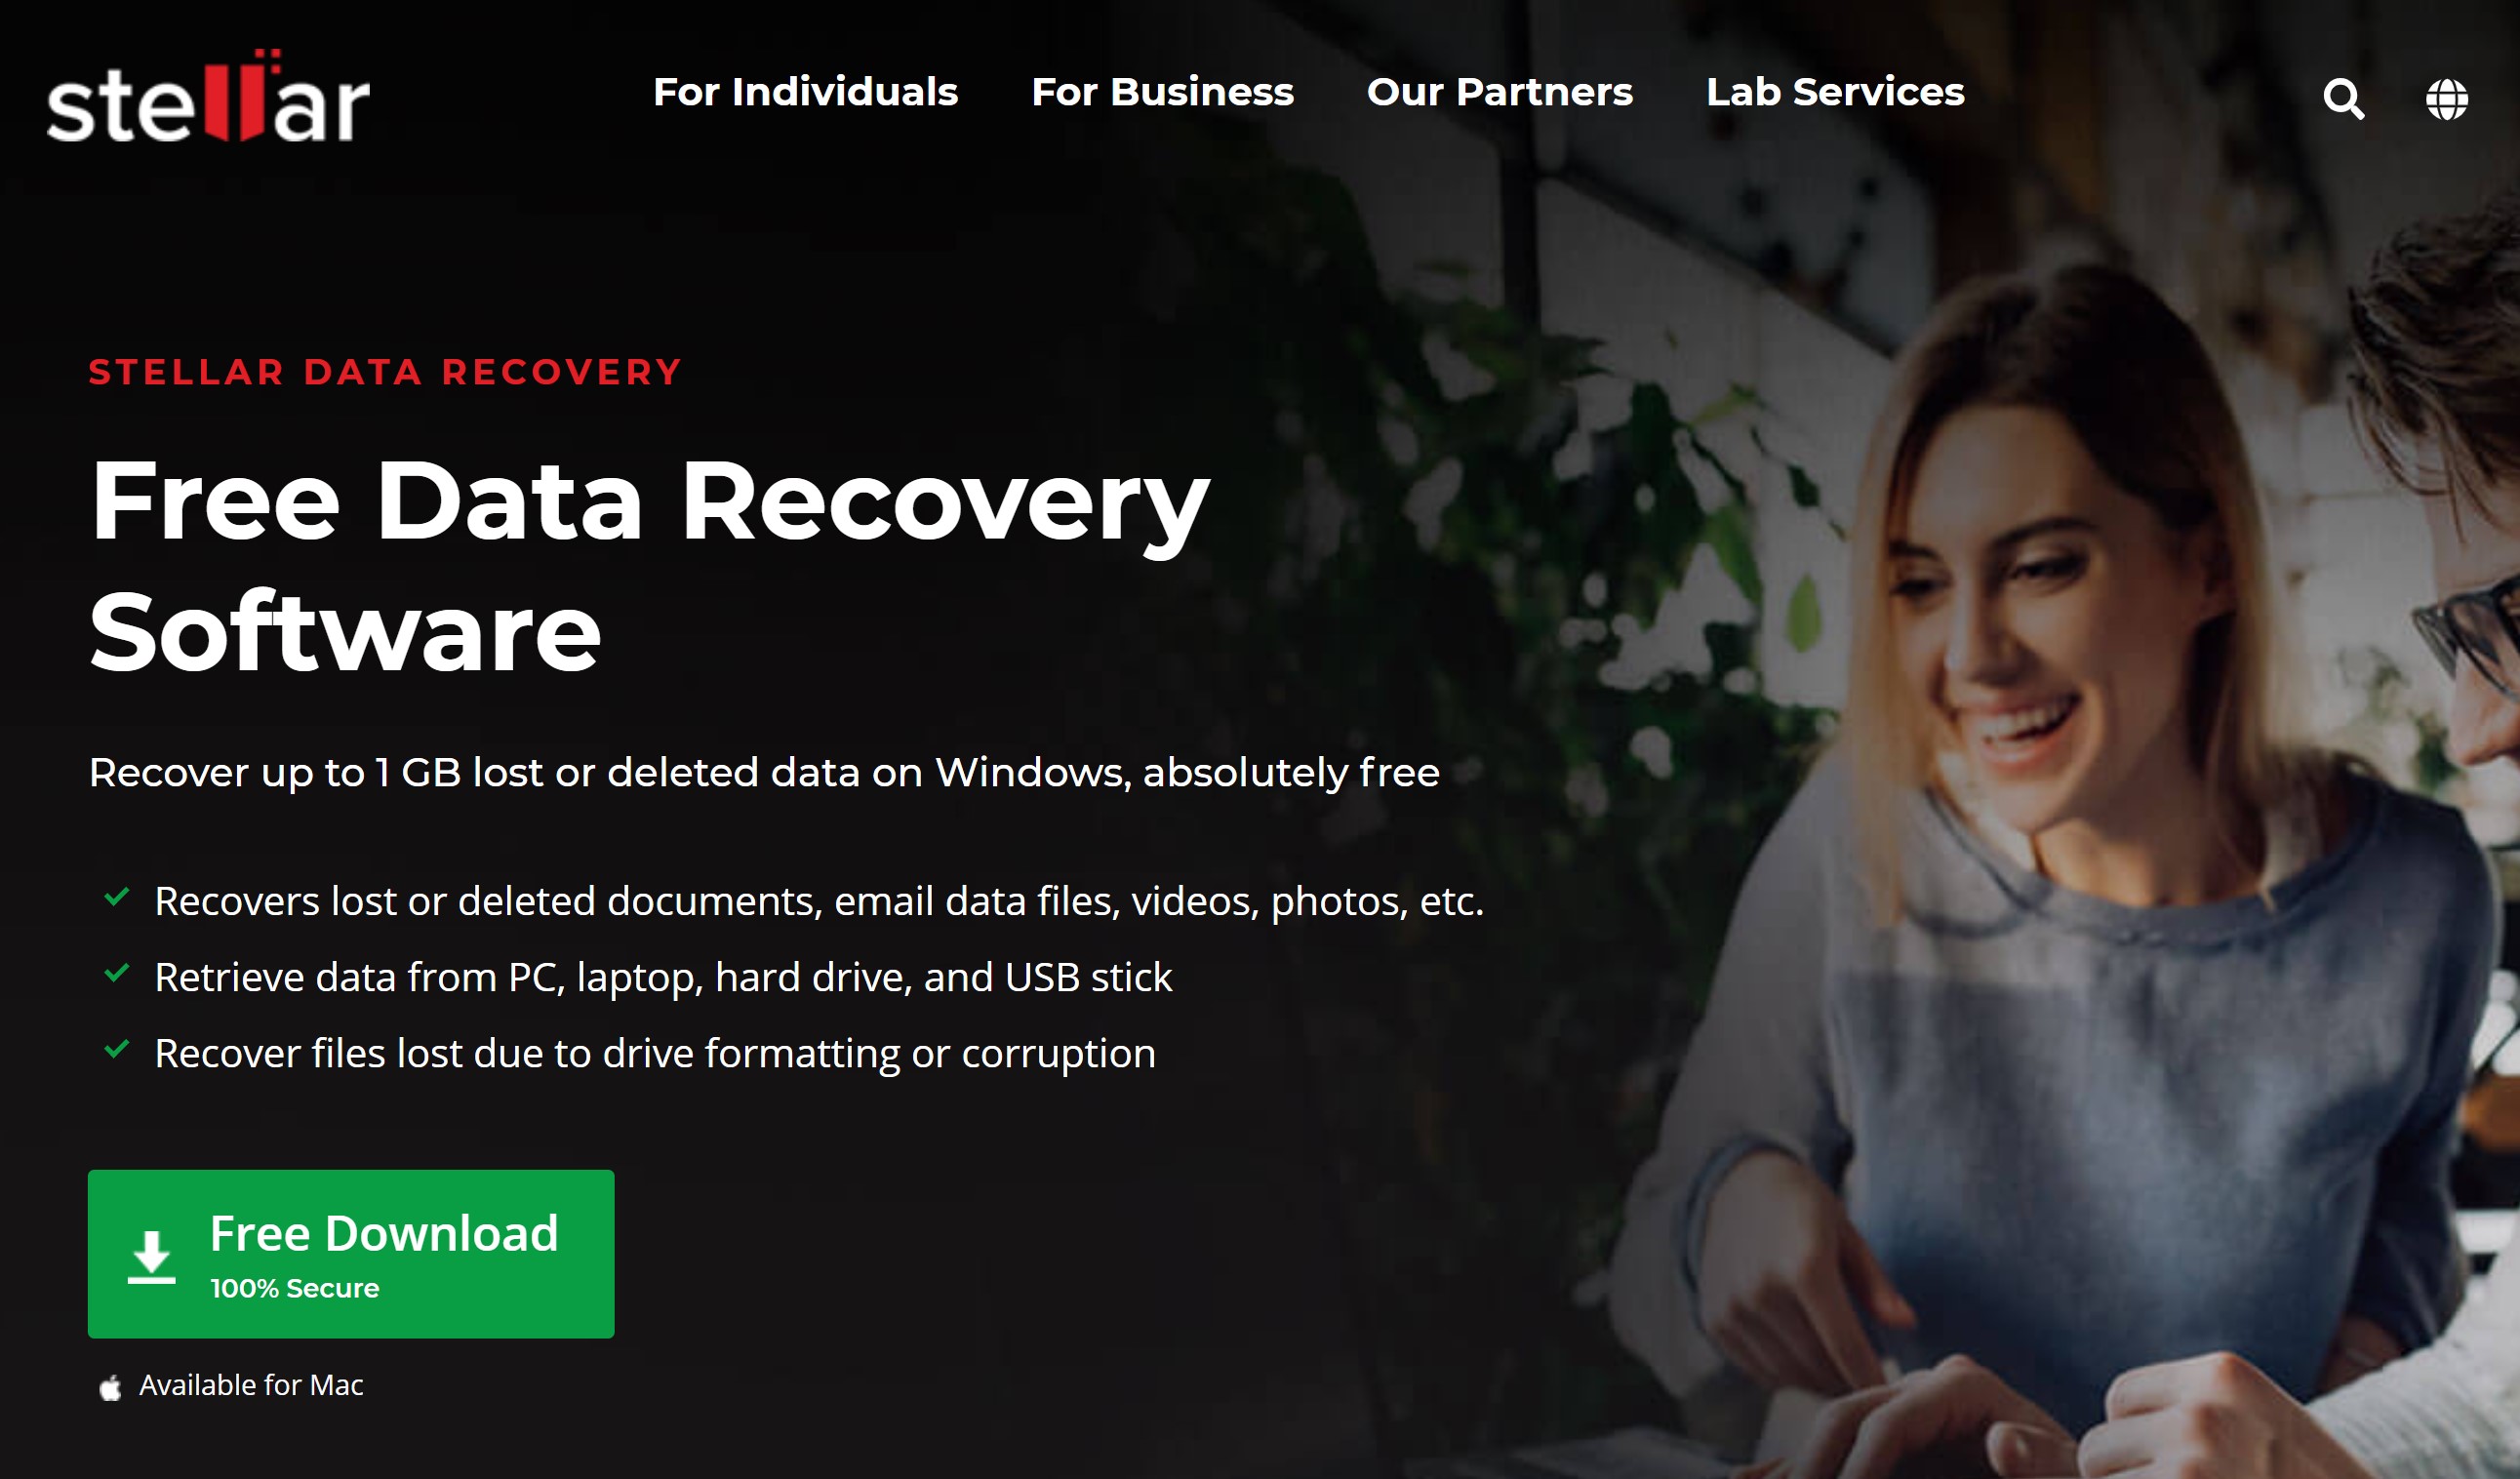 stellar data recovery initial loading